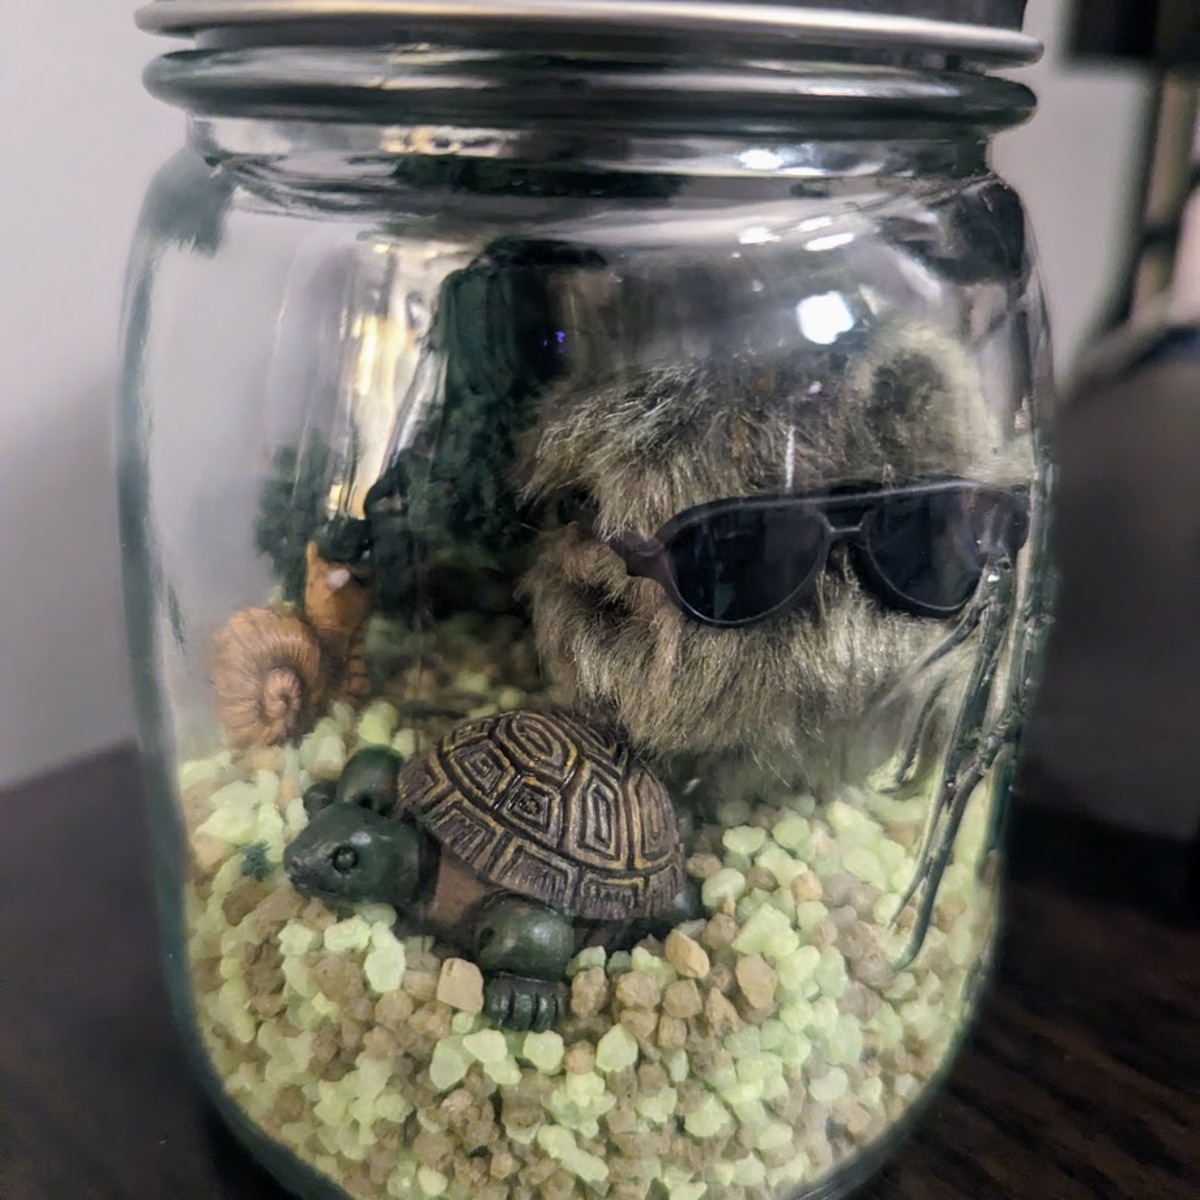 A glass ball jar containing some rocks, a mini turtle and a moss ball wearing dark sunglasses.